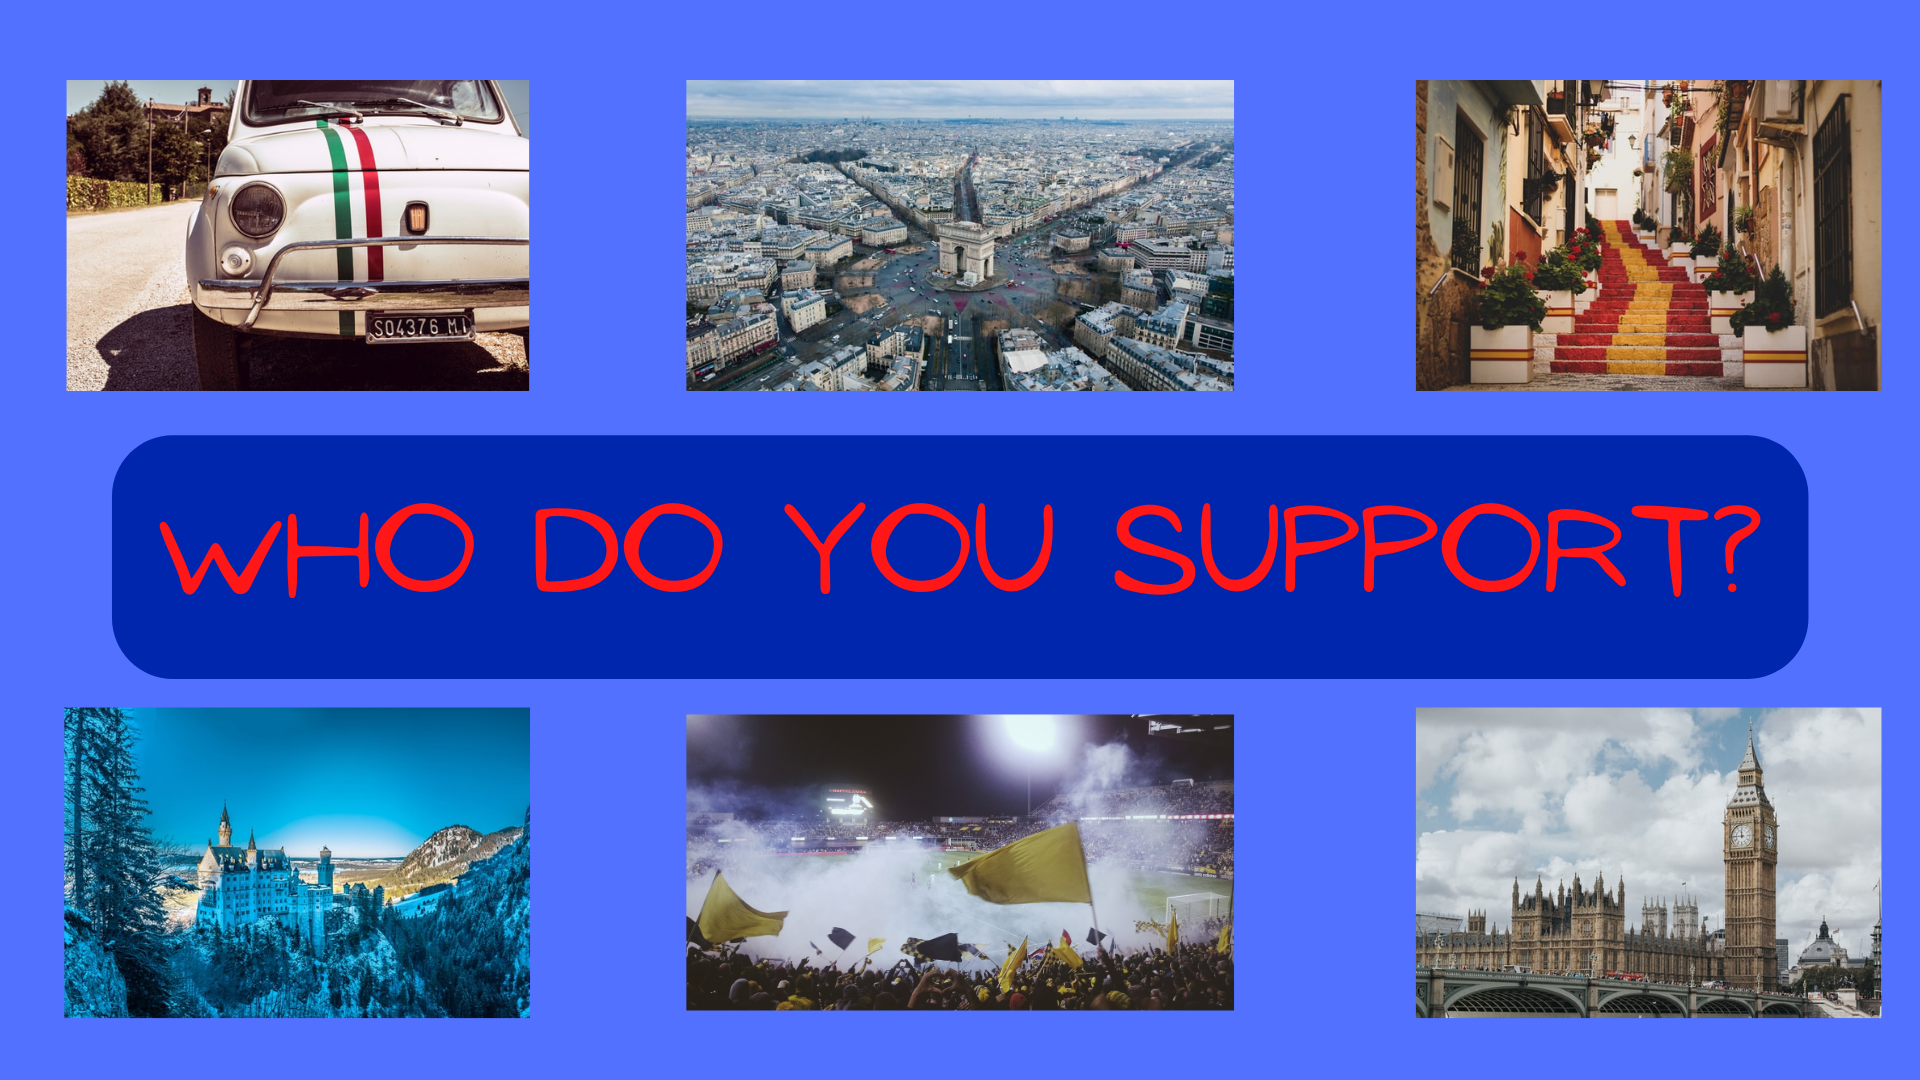 Who do you support?